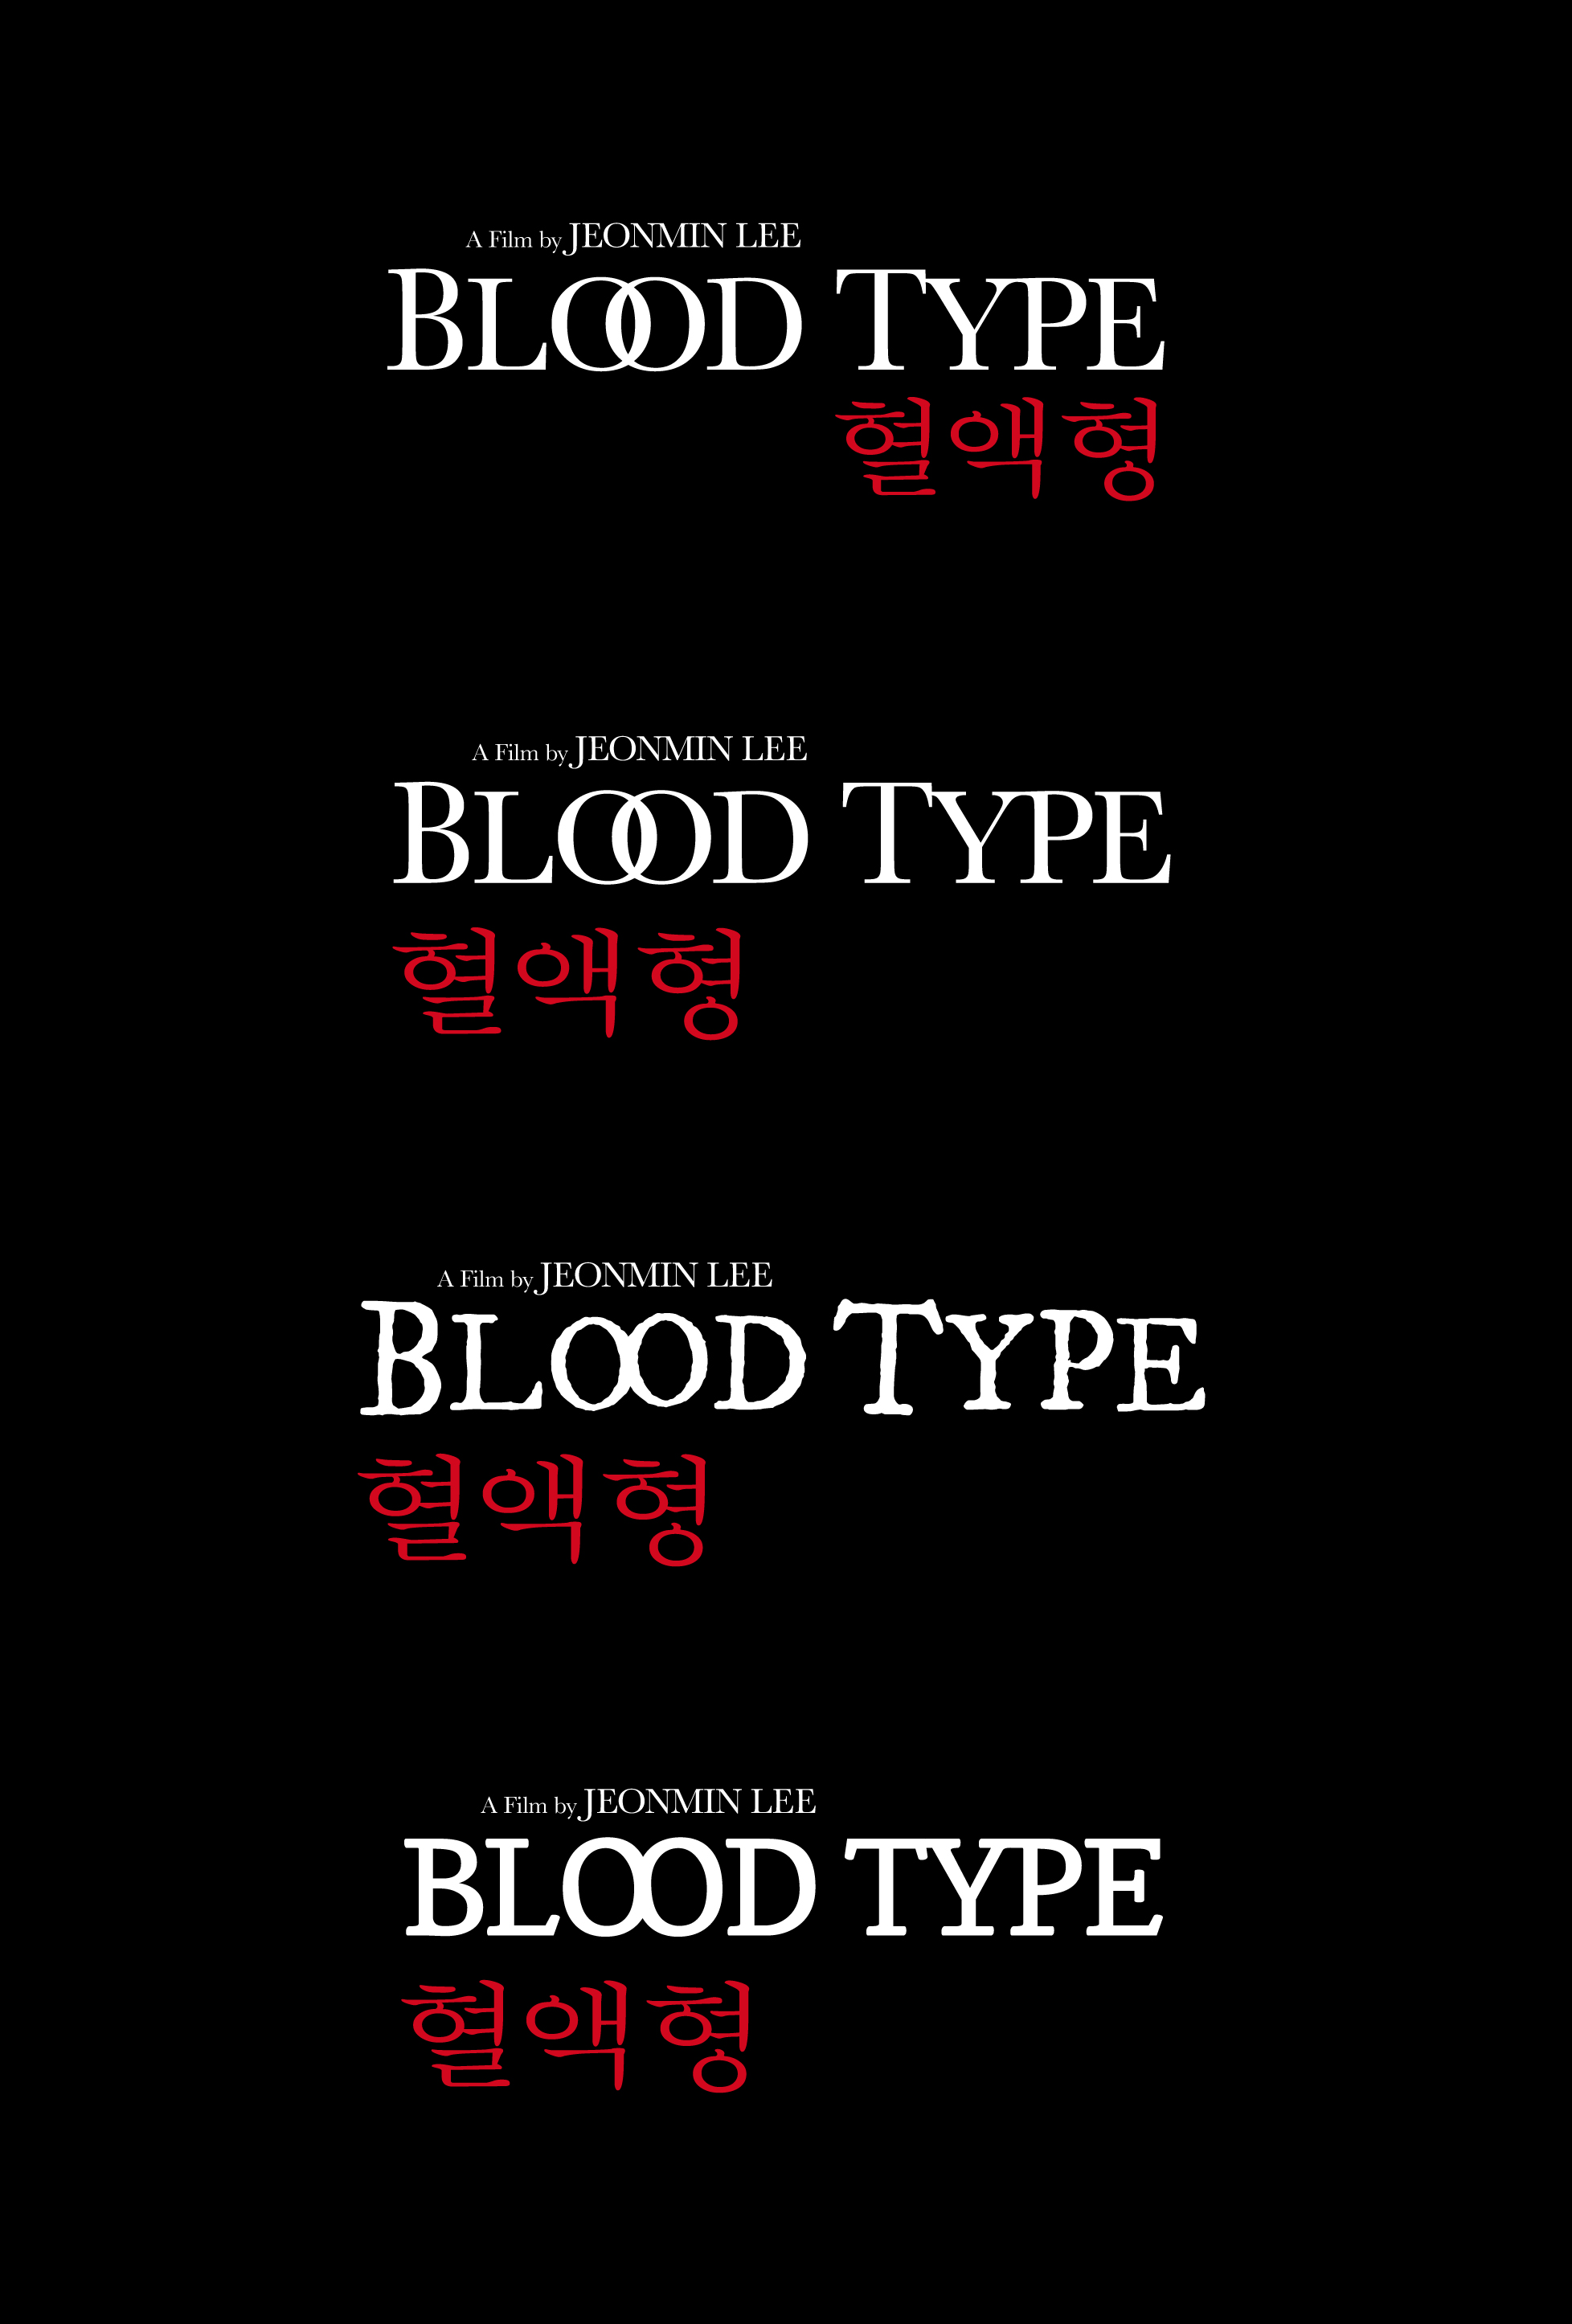 Blood Type - Film Title Design by Christopher King